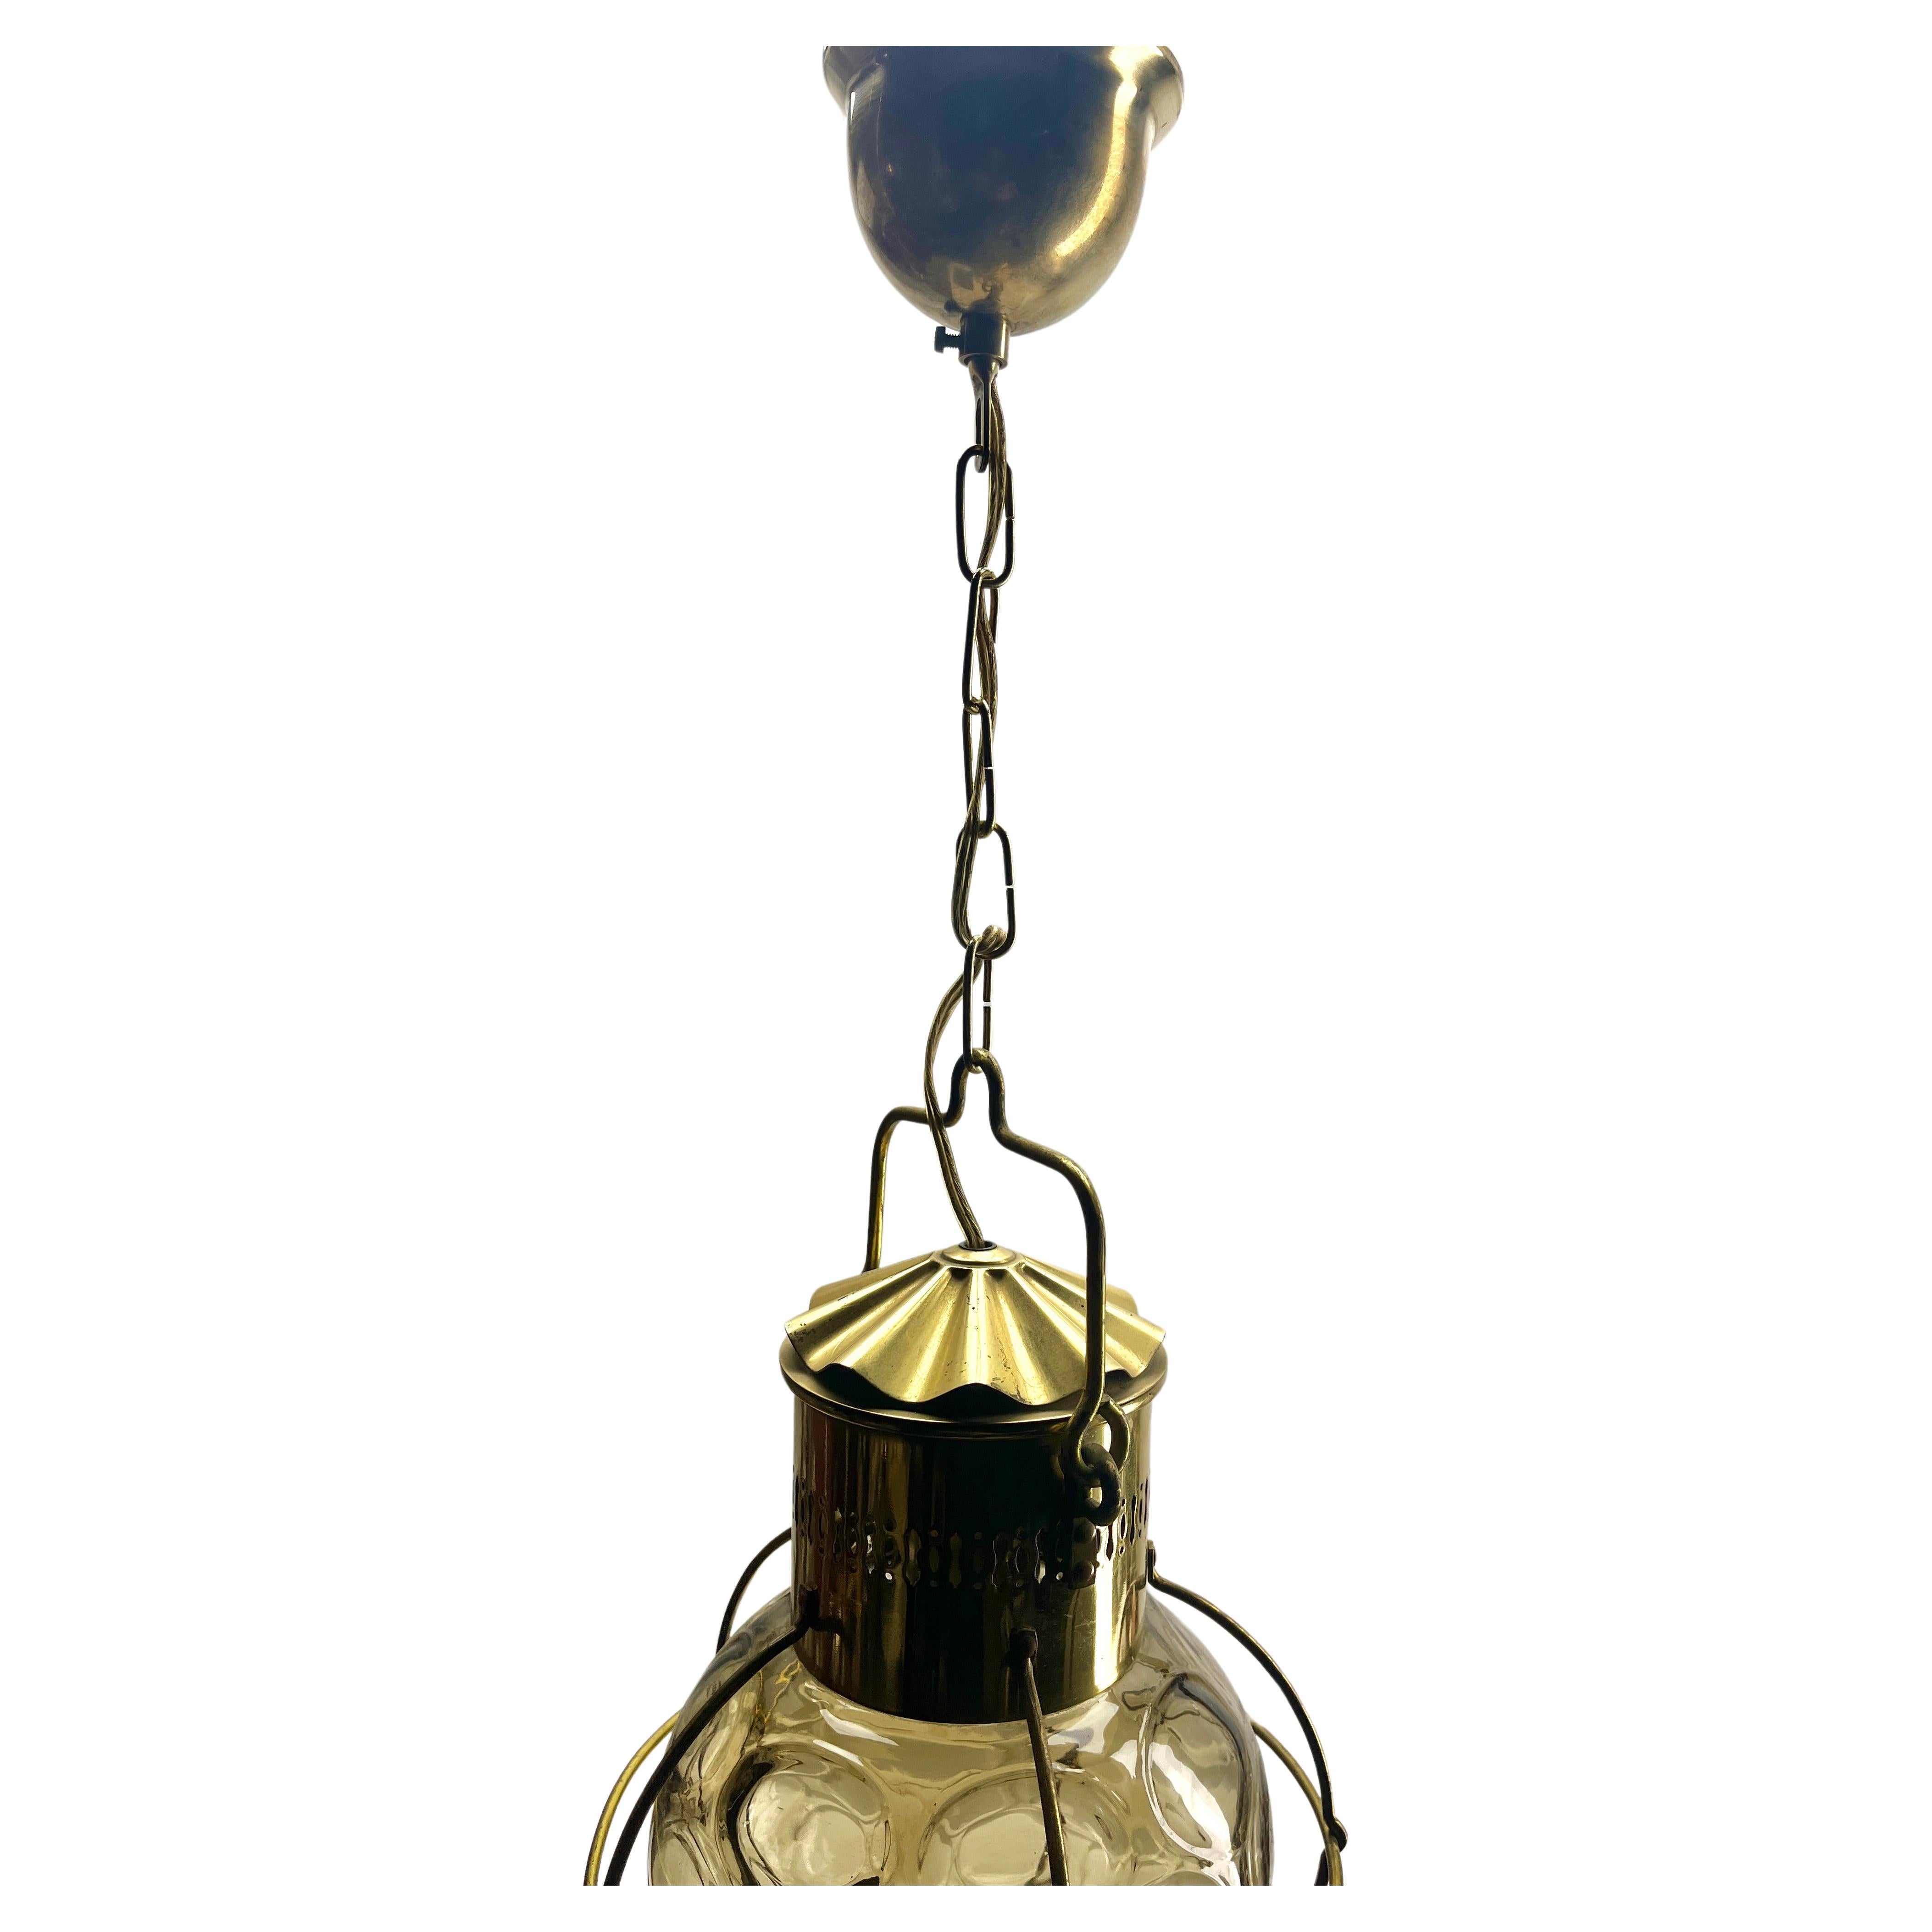 Mid-20th Century Antique Style of Kosmos Brenner Oil Ships Lamp Converted to Electric, 1930s For Sale